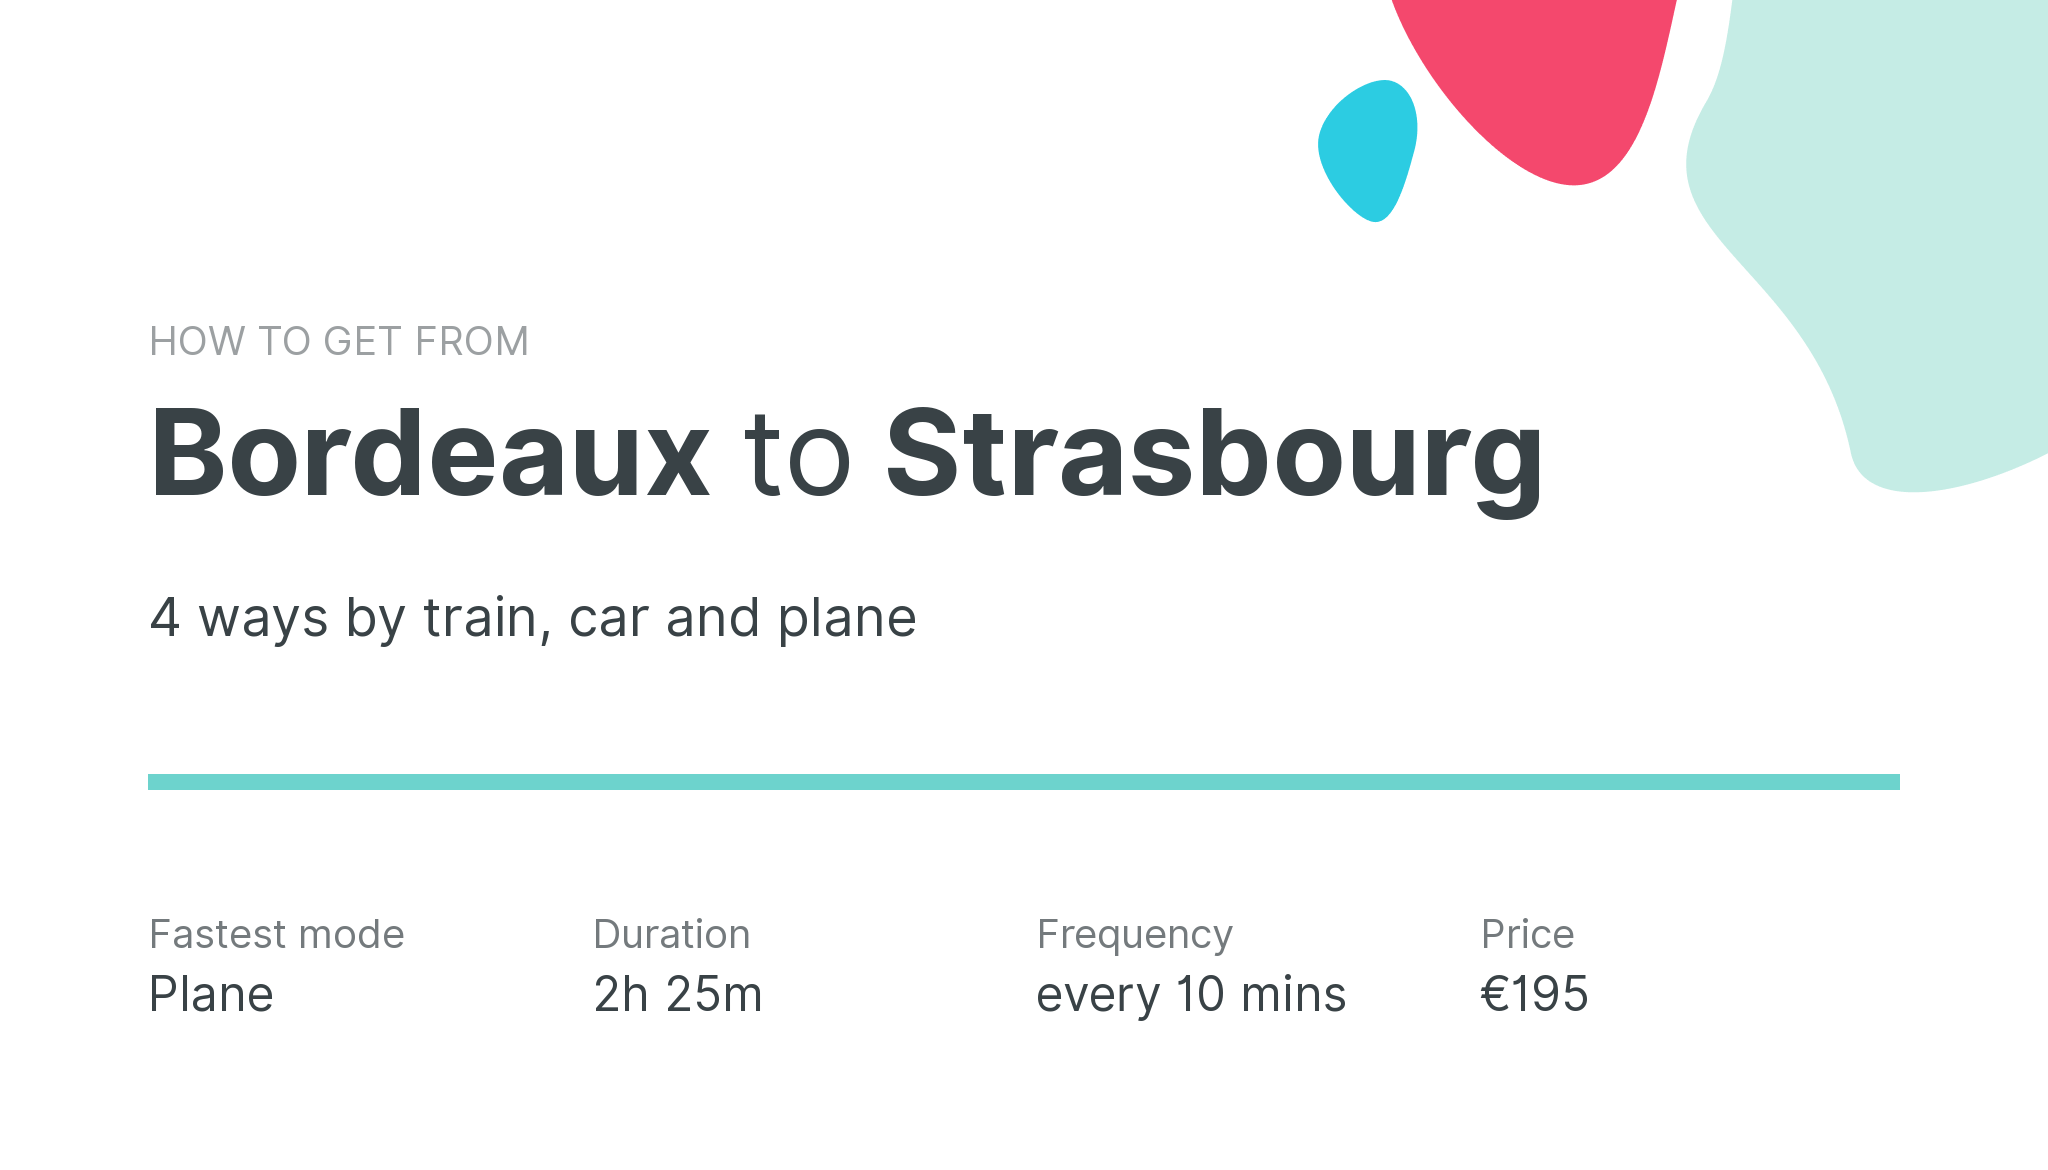 How do I get from Bordeaux to Strasbourg